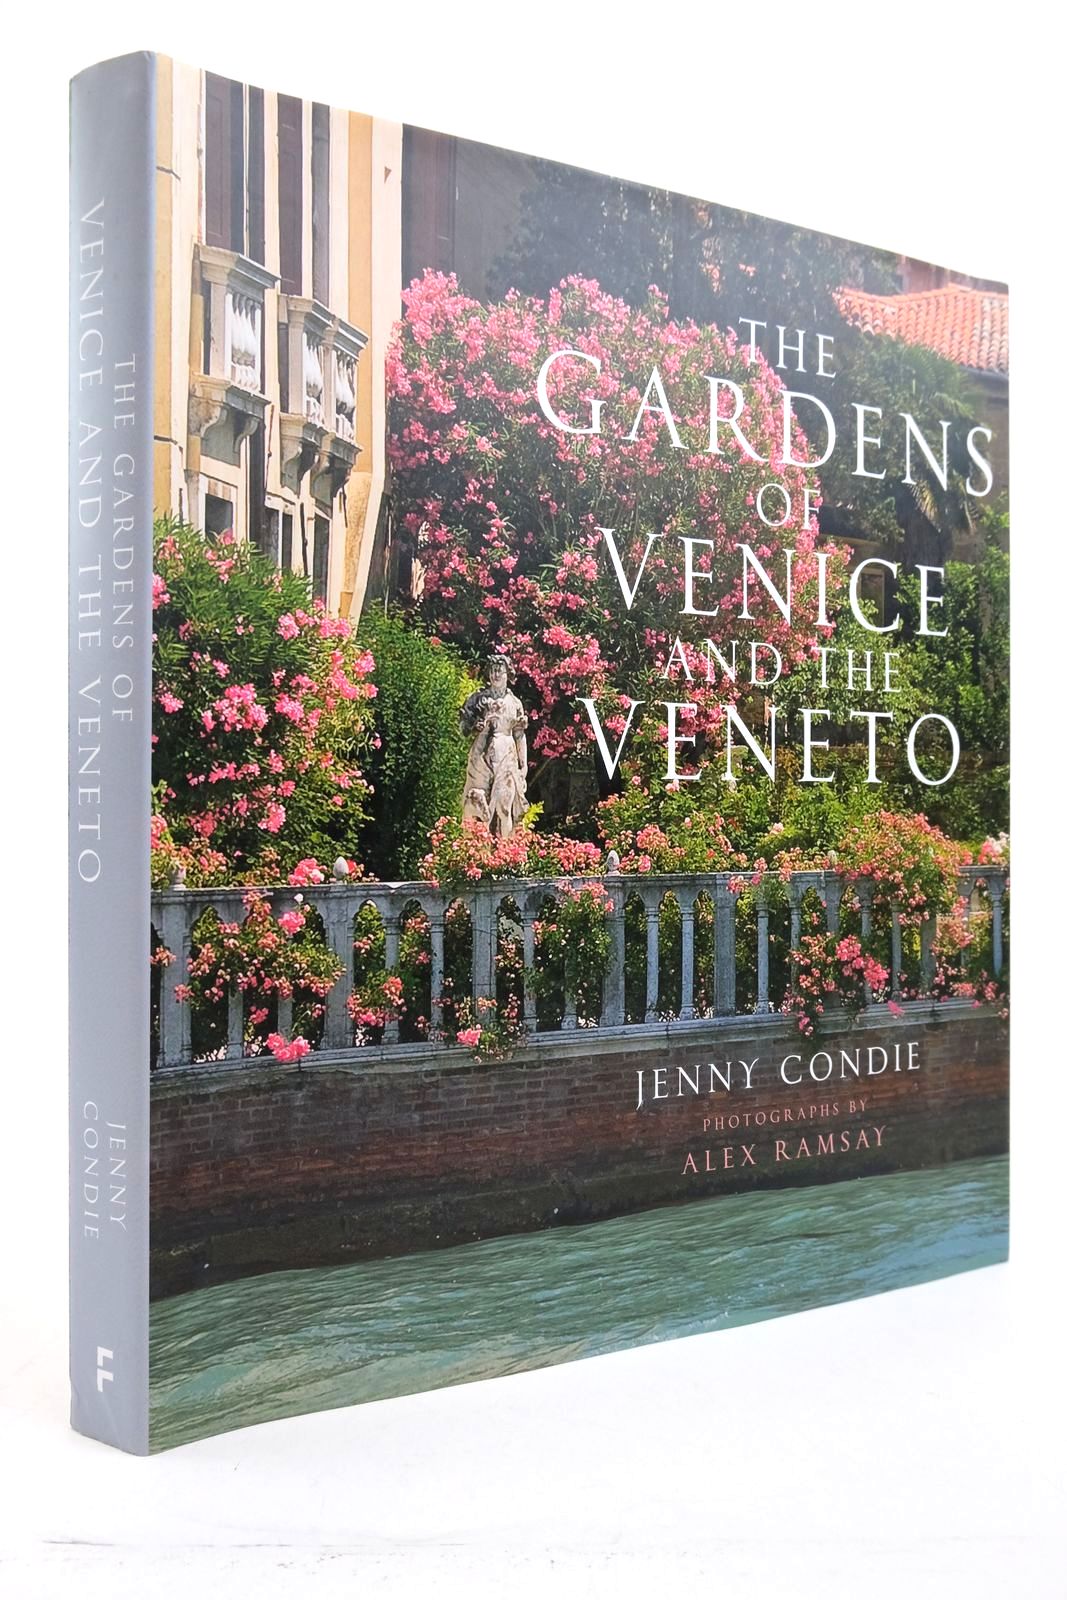 Photo of THE GARDENS OF VENICE AND THE VENETO written by Condie, Jenny published by Frances Lincoln Limited (STOCK CODE: 2139018)  for sale by Stella & Rose's Books